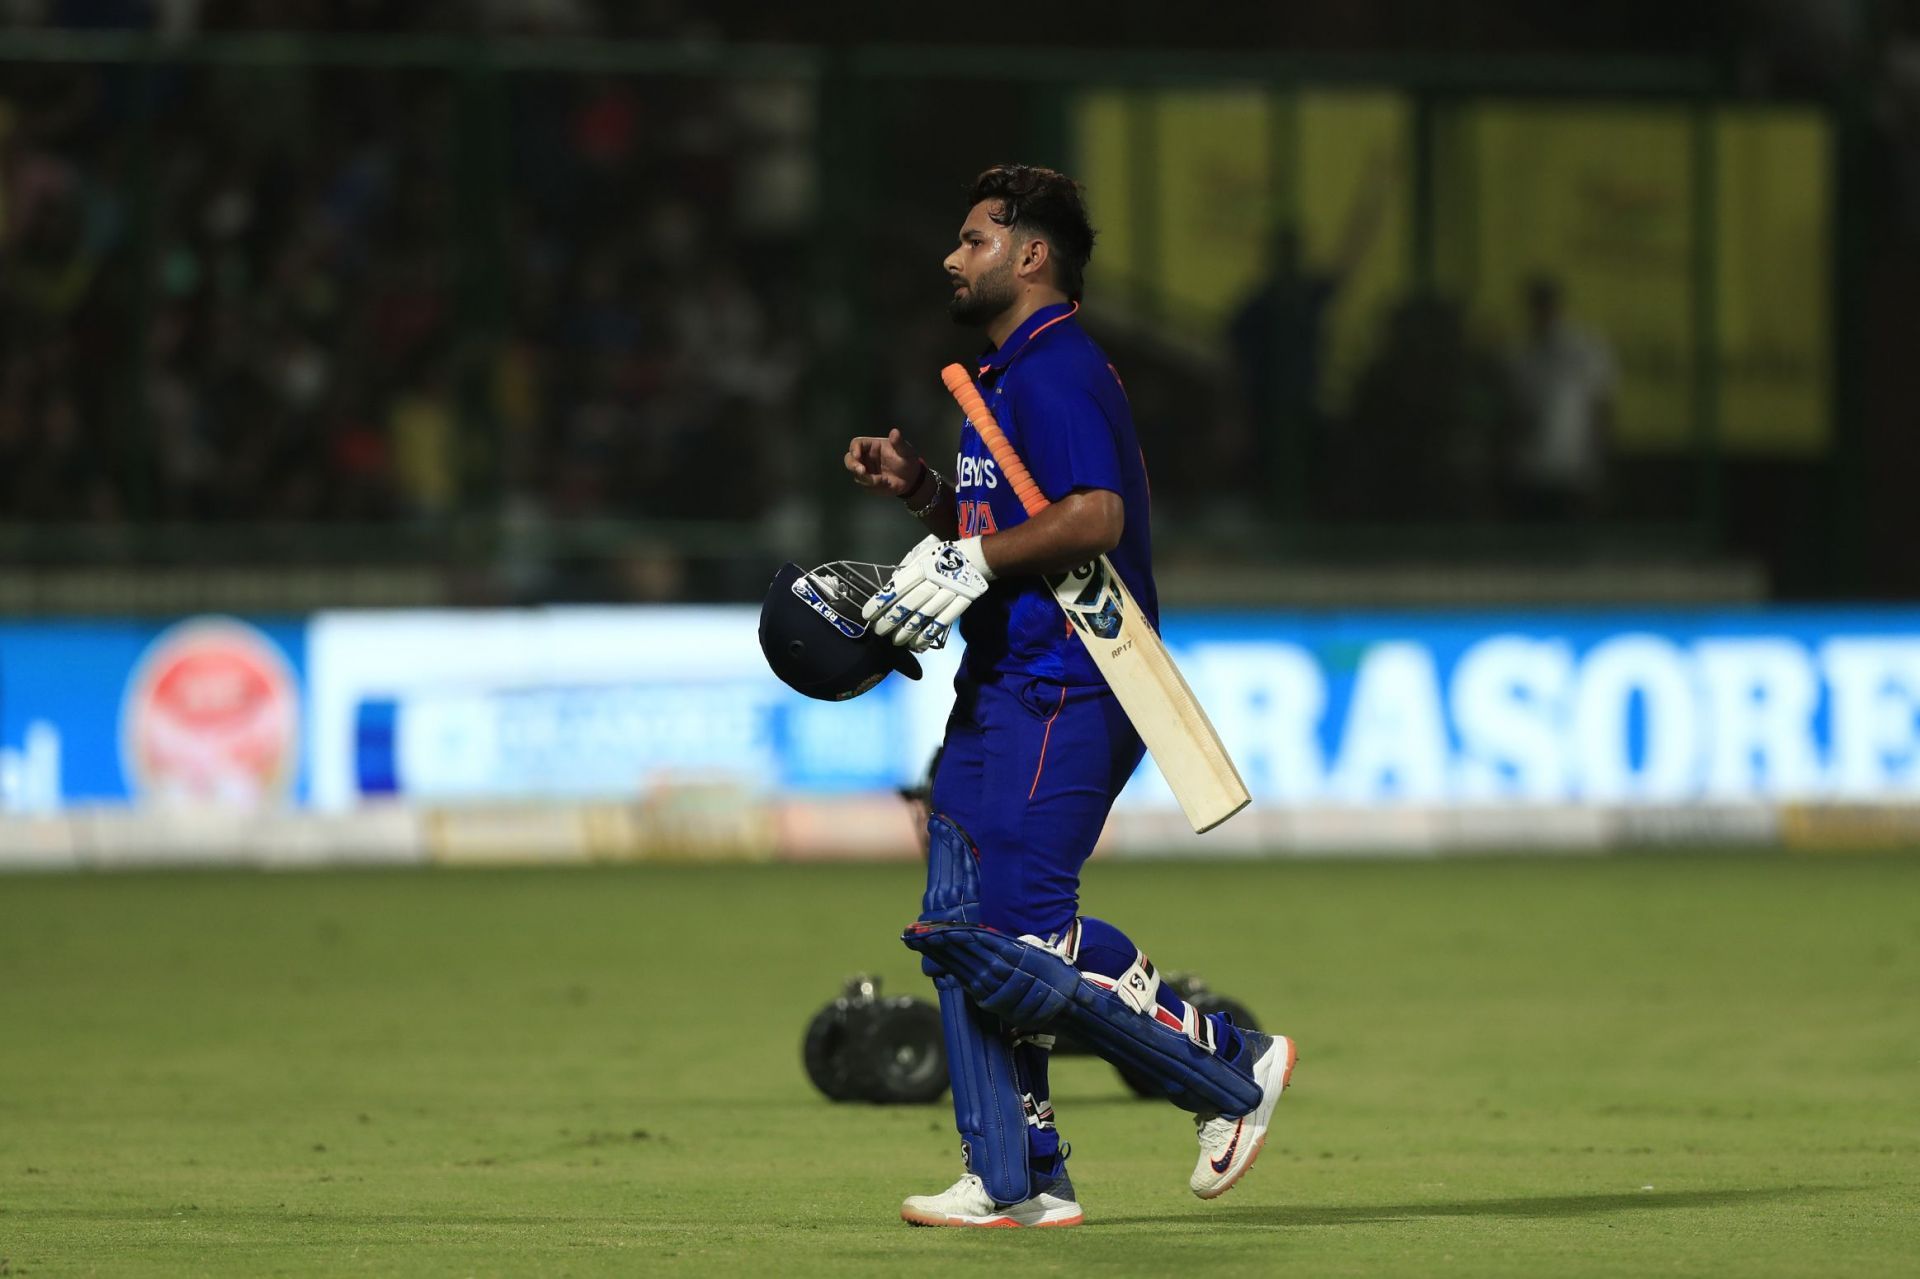 Rishabh Pant will be keen to put the disappointing series against South Africa behind him. (P.C.:Getty Images)